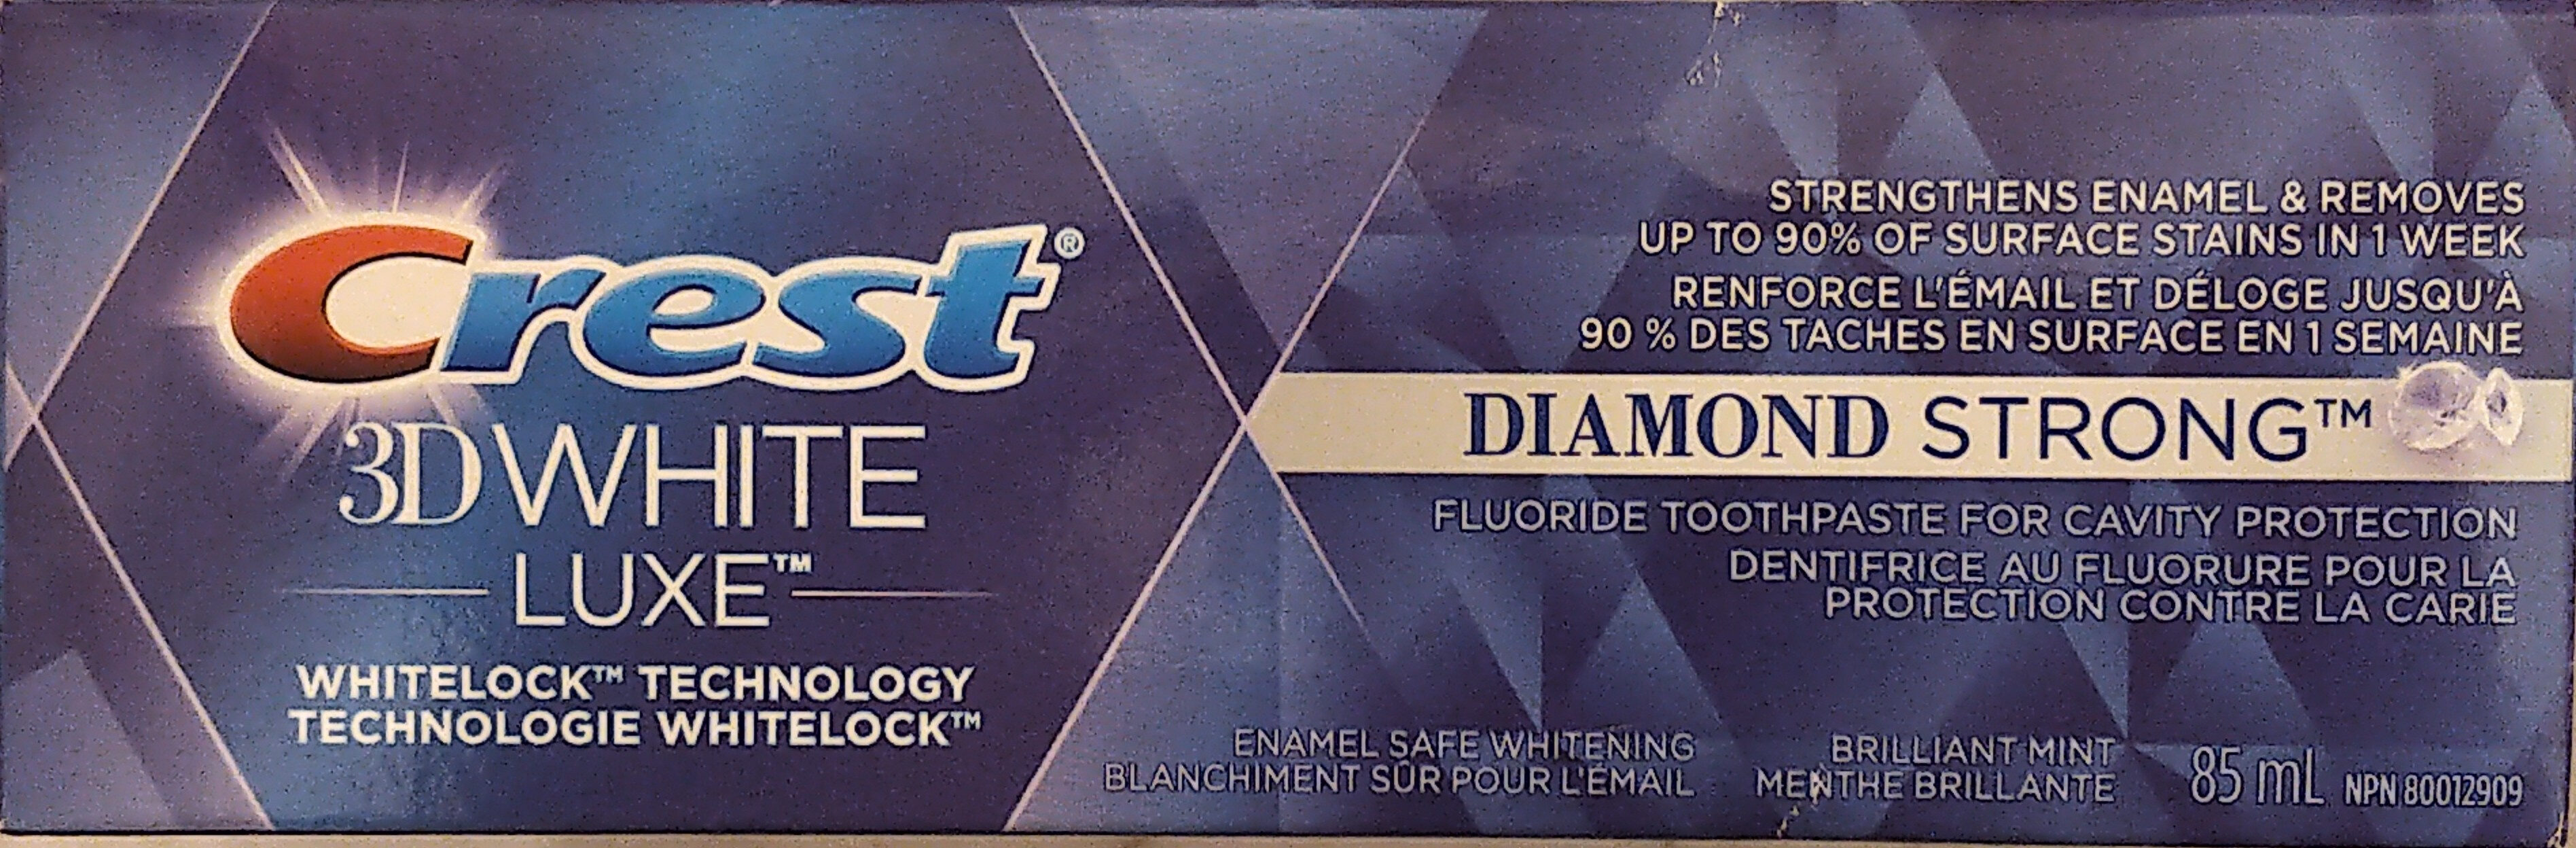 3D White Luxe Diamond Strong Brilliant Mint Fluoride Toothpaste - Product - en